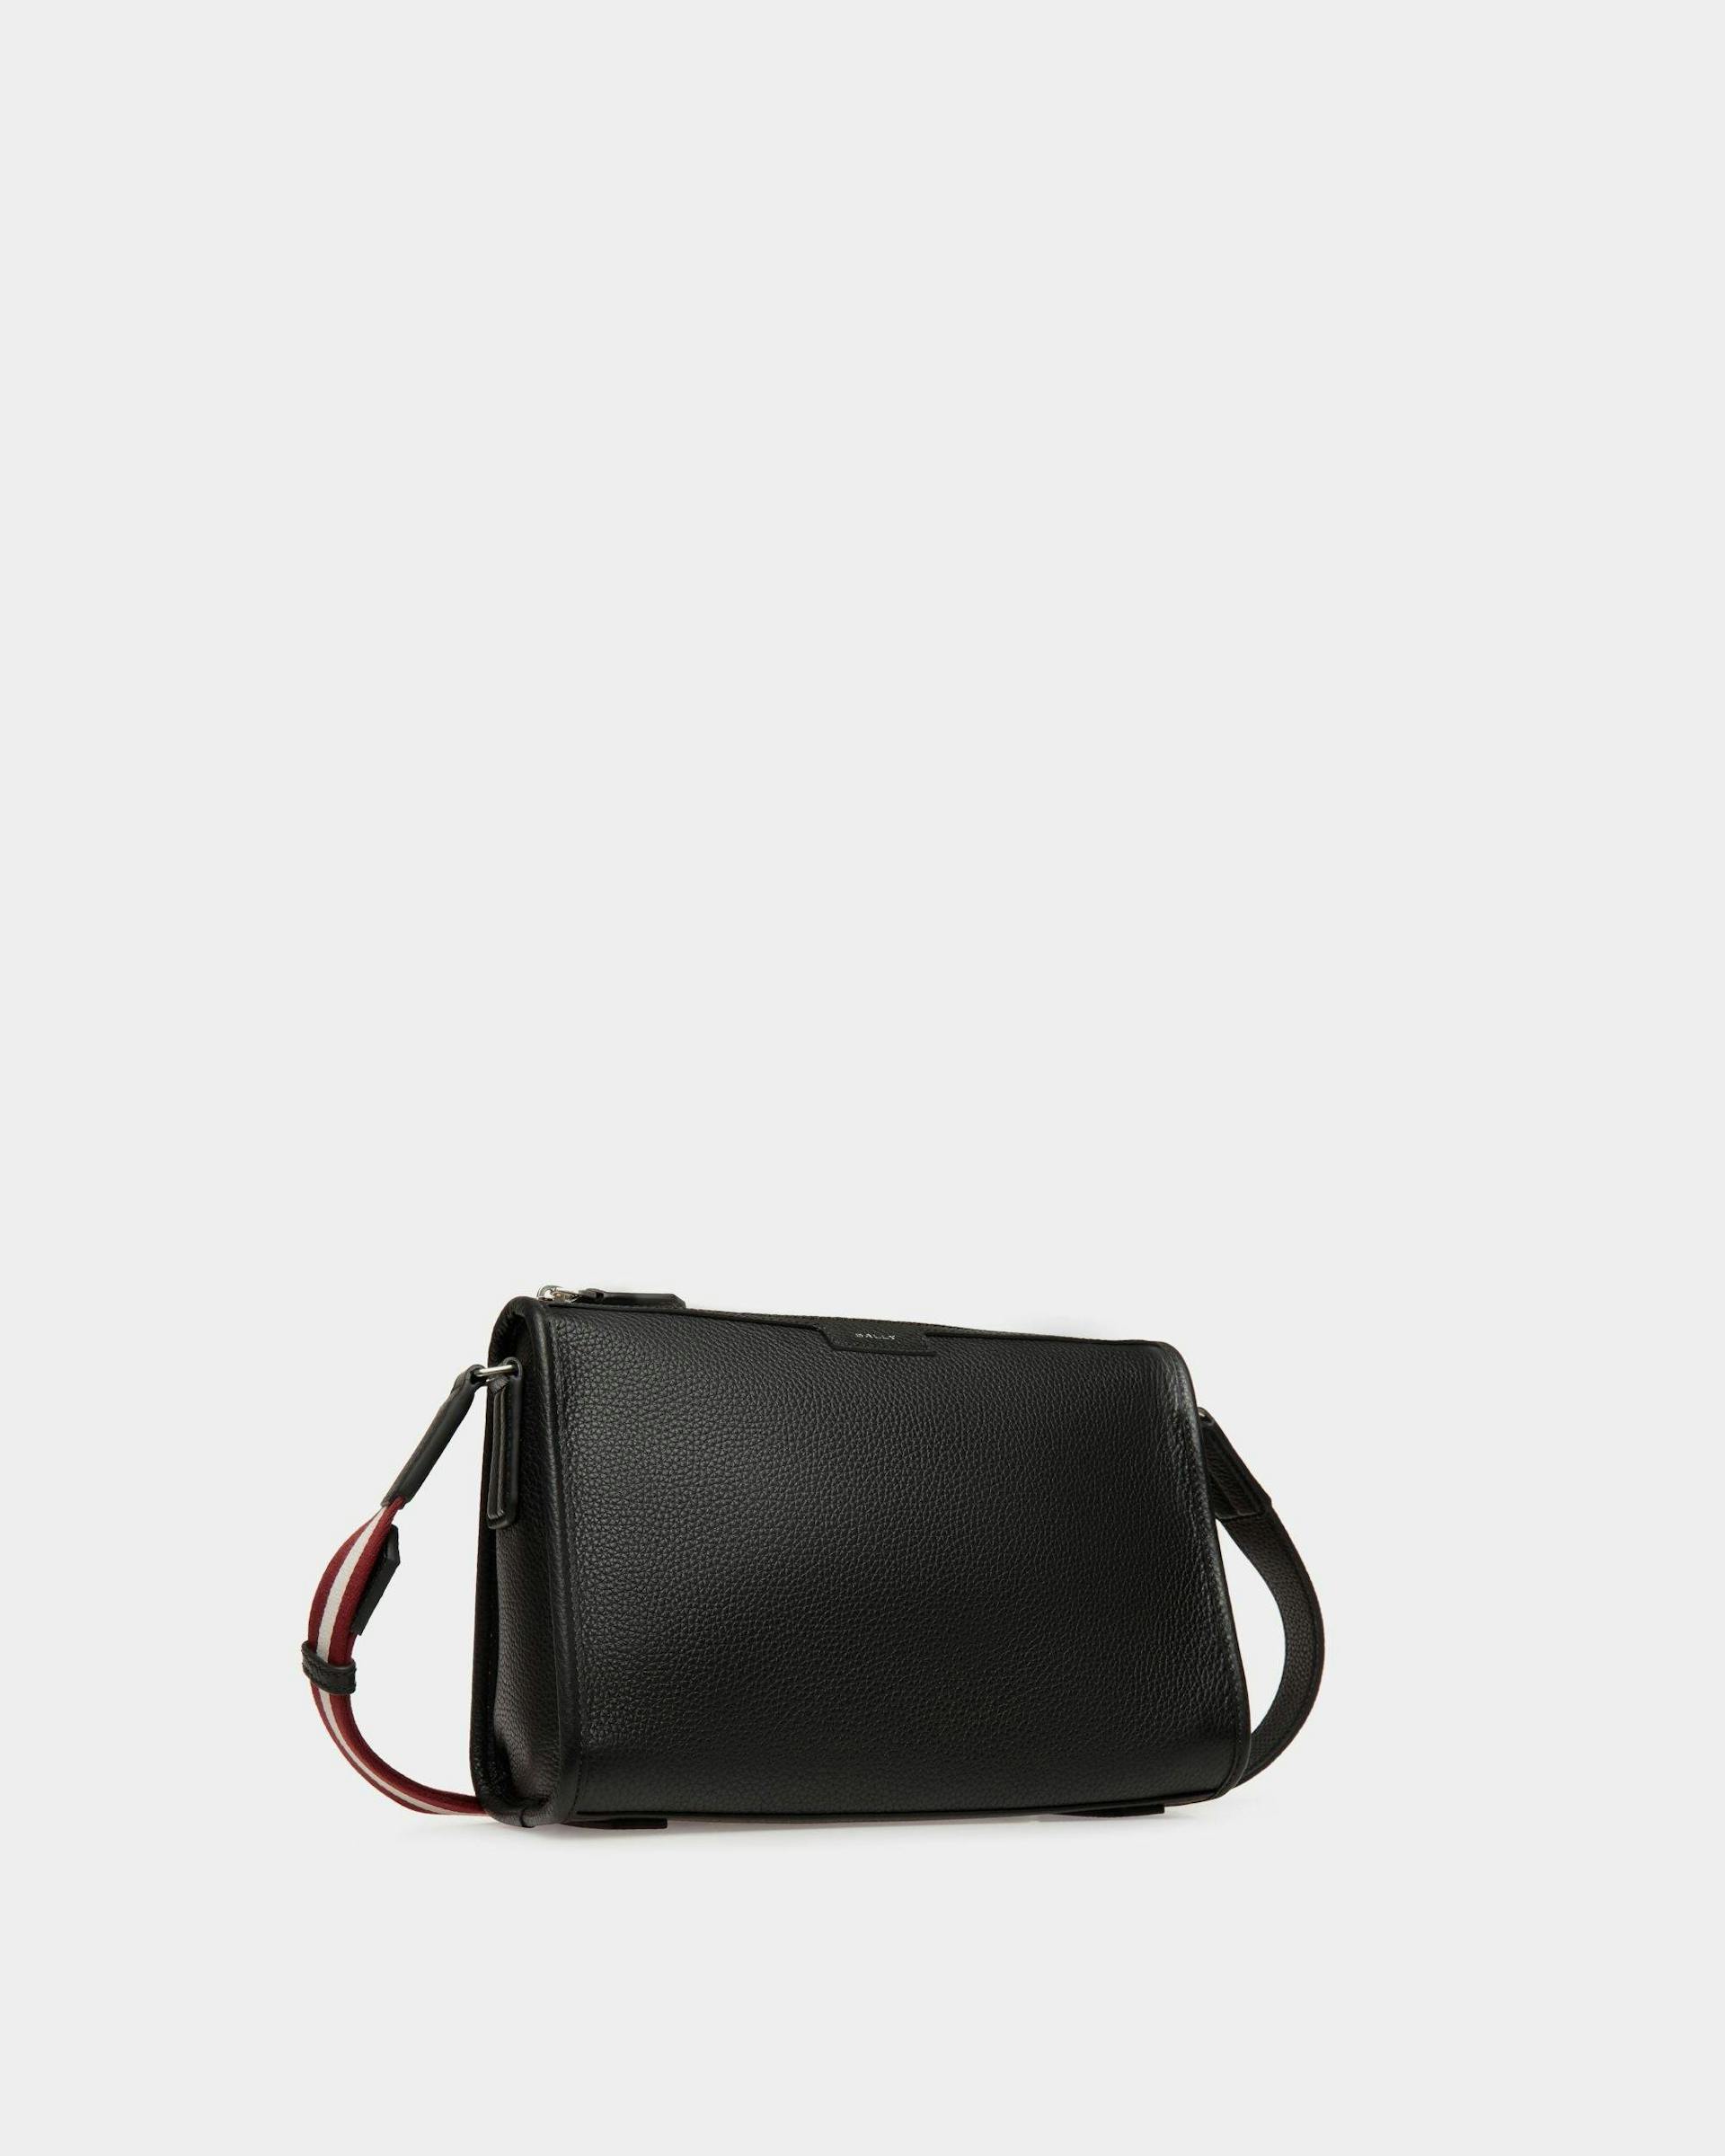 Men's Code Small Messenger Bag in Black Grained Leather | Bally | Still Life 3/4 Front